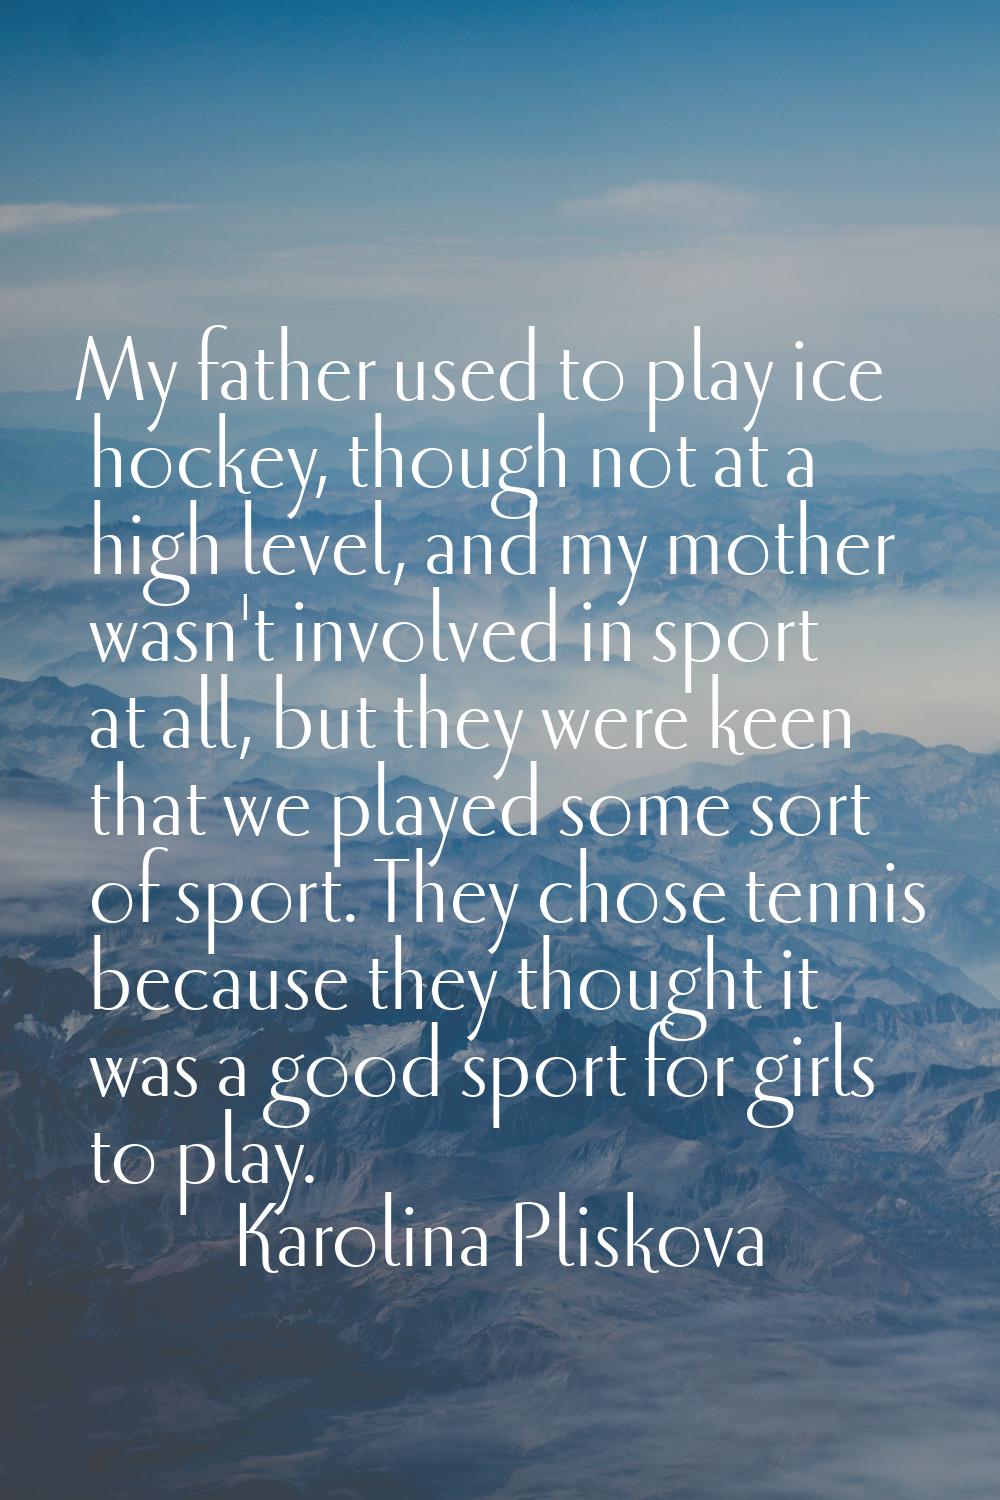 My father used to play ice hockey, though not at a high level, and my mother wasn't involved in spo